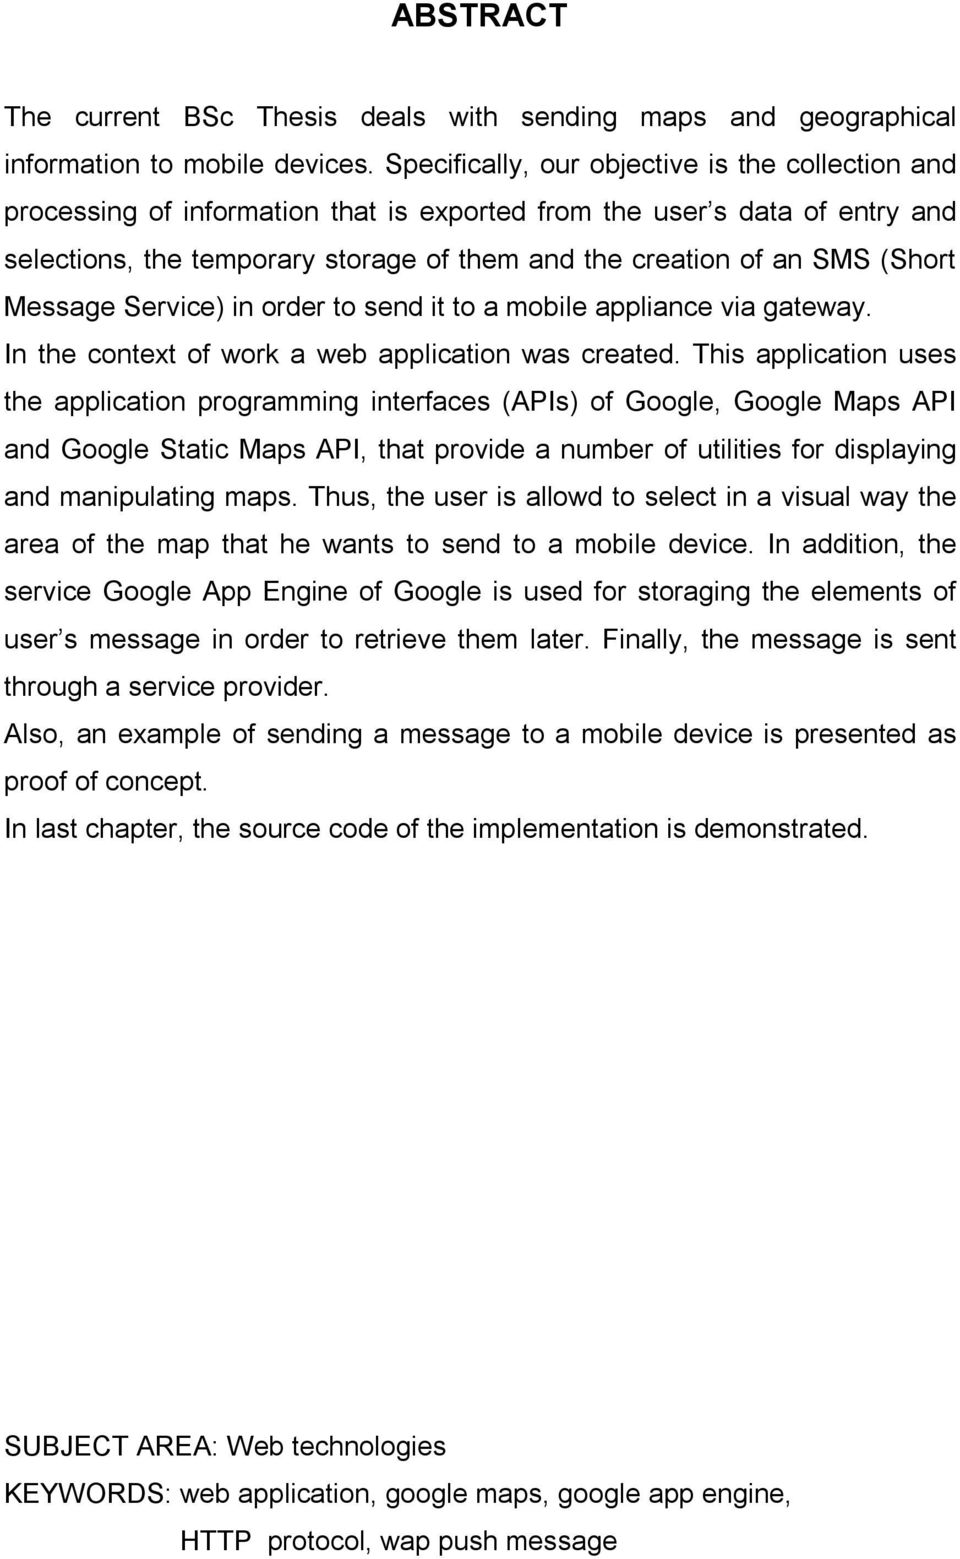 (Short Message Service) in order to send it to a mobile appliance via gateway. In the context of work a web application was created.